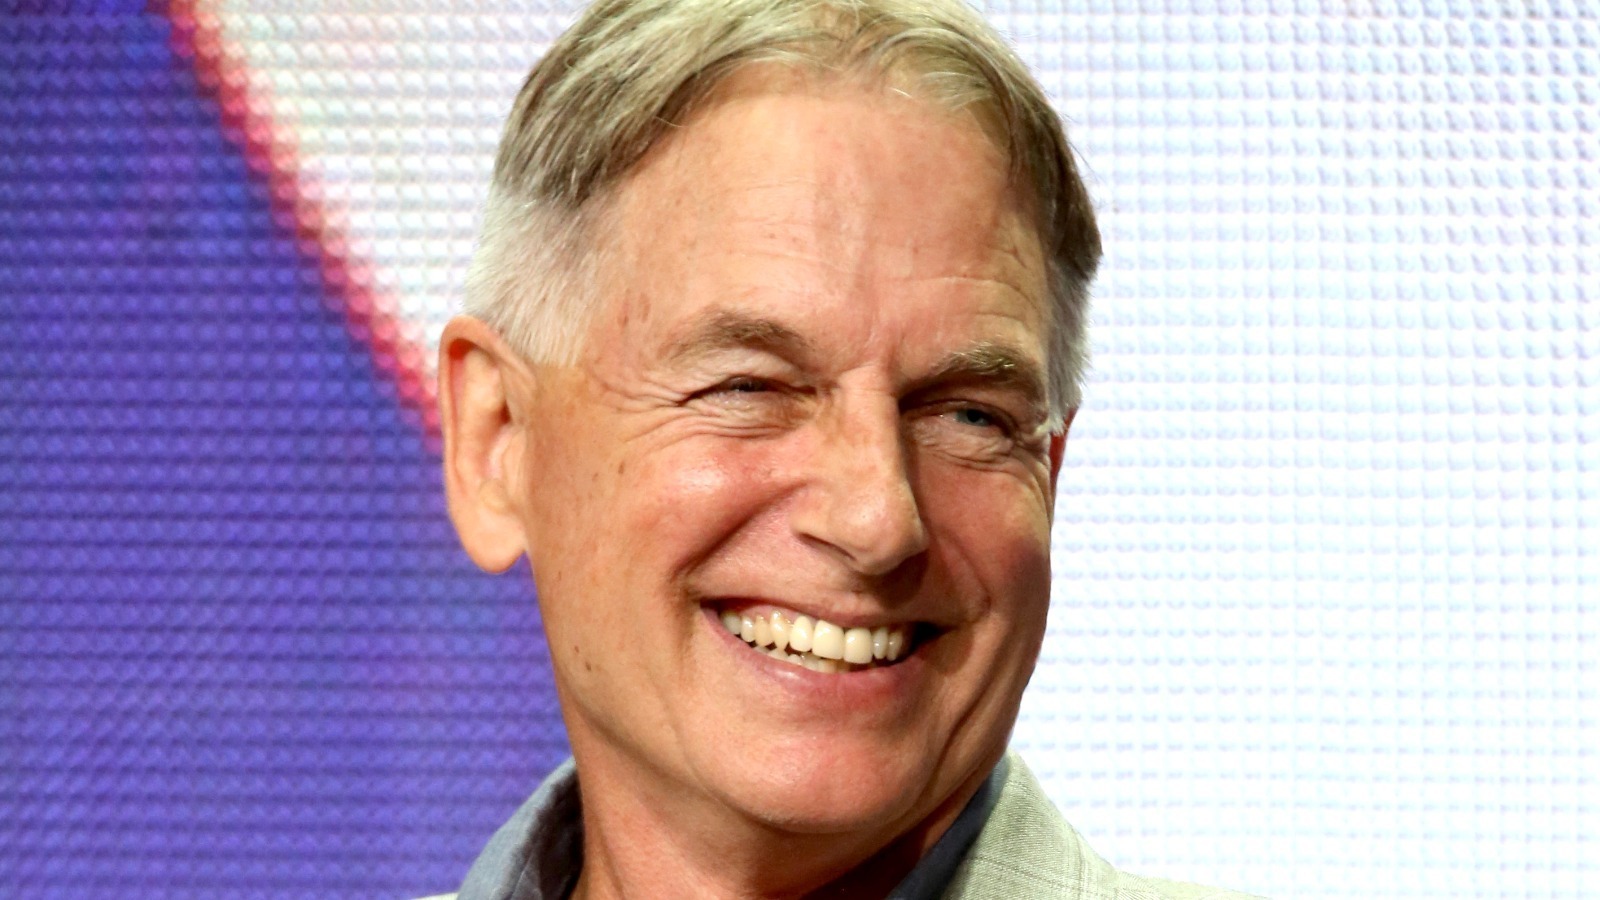 The Real Reason Some Fans Think Mark Harmon Will Return To NCIS